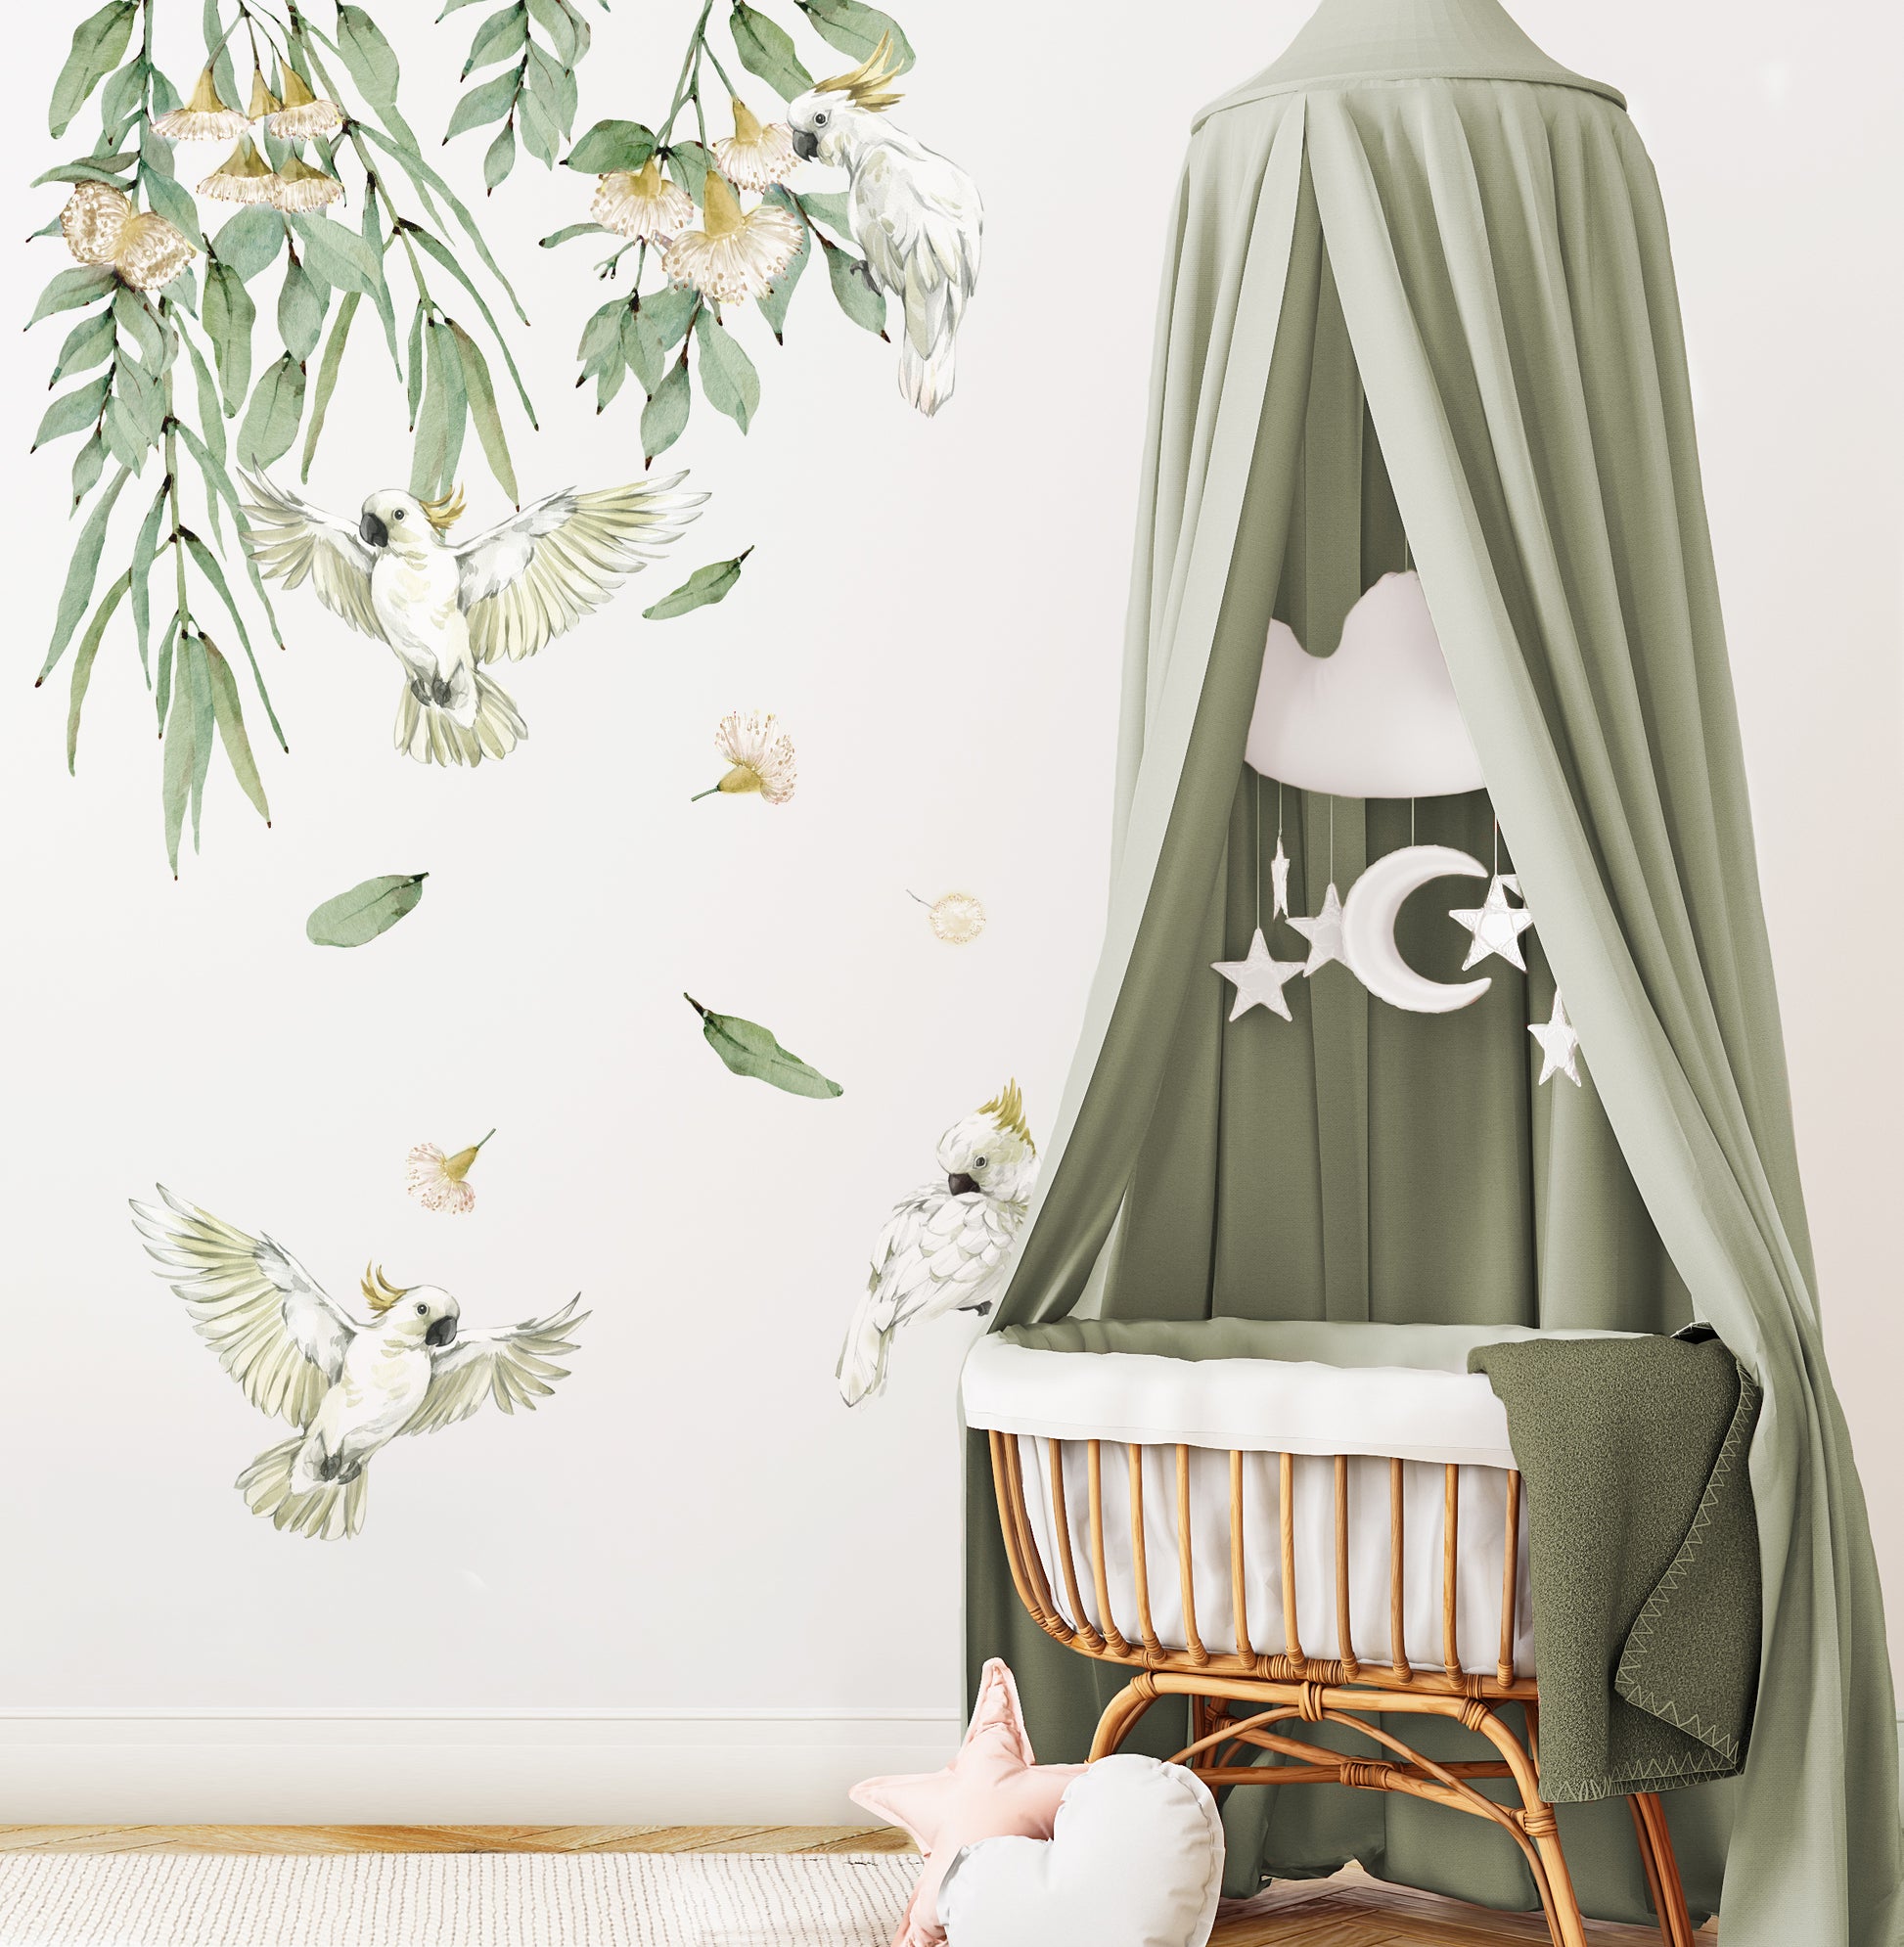 Cockatoo Bird Wall Decals - Wall Decals Australia - Fable and Fawn 